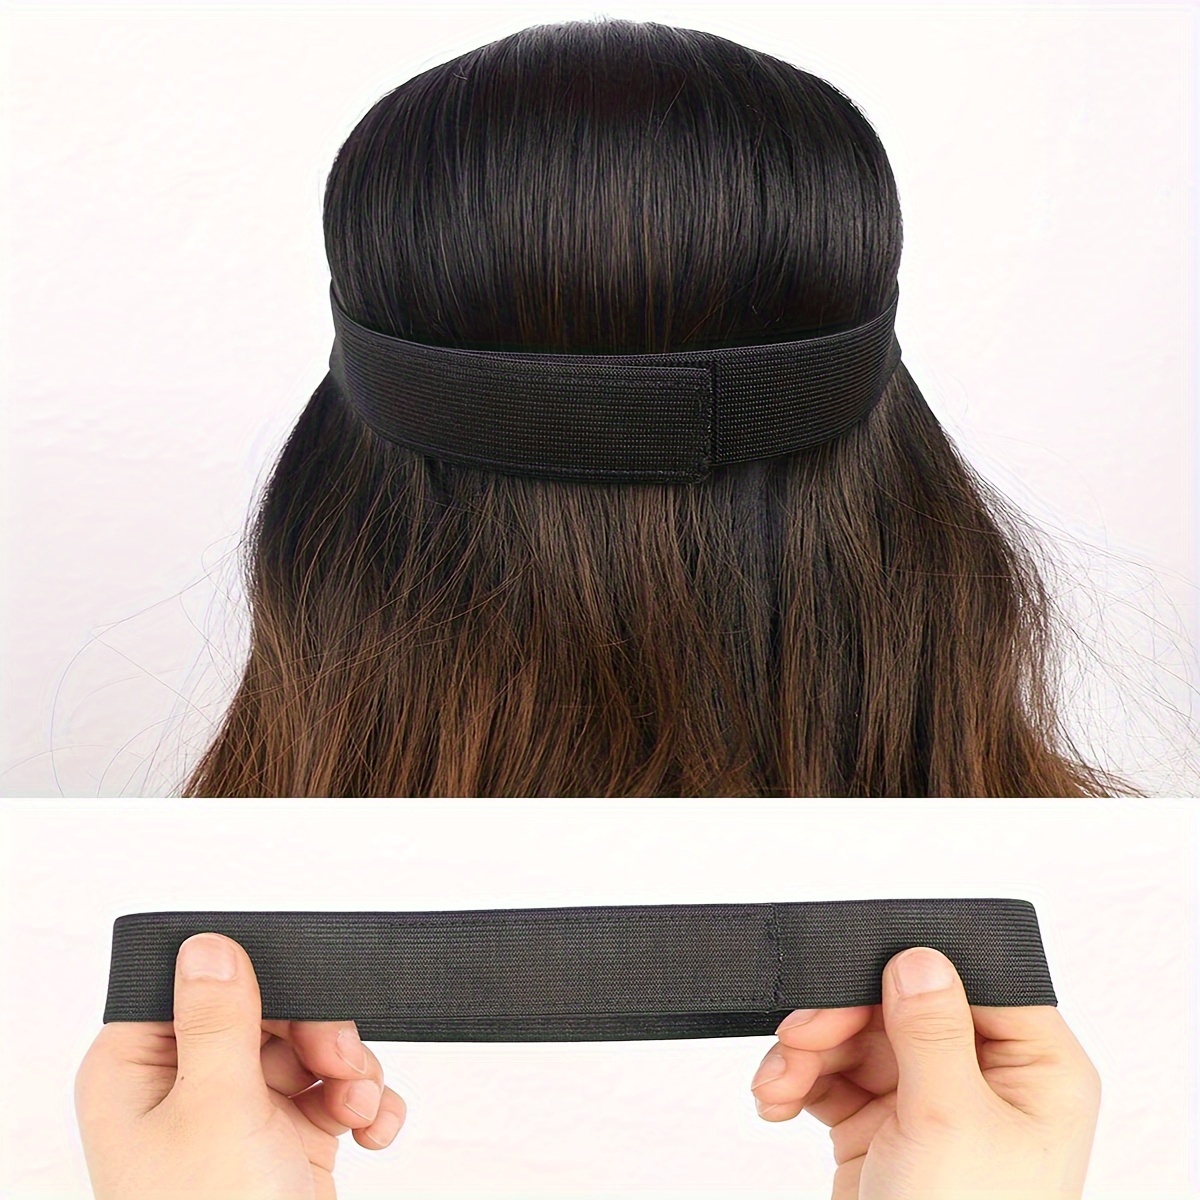 Elastic Band for Lace Frontal Melt,Lace Melting Band for Lace Wigs, Wig Elastic Band for Melting Lace, Adjustable Wig Band for Edges, Lace Band Wig